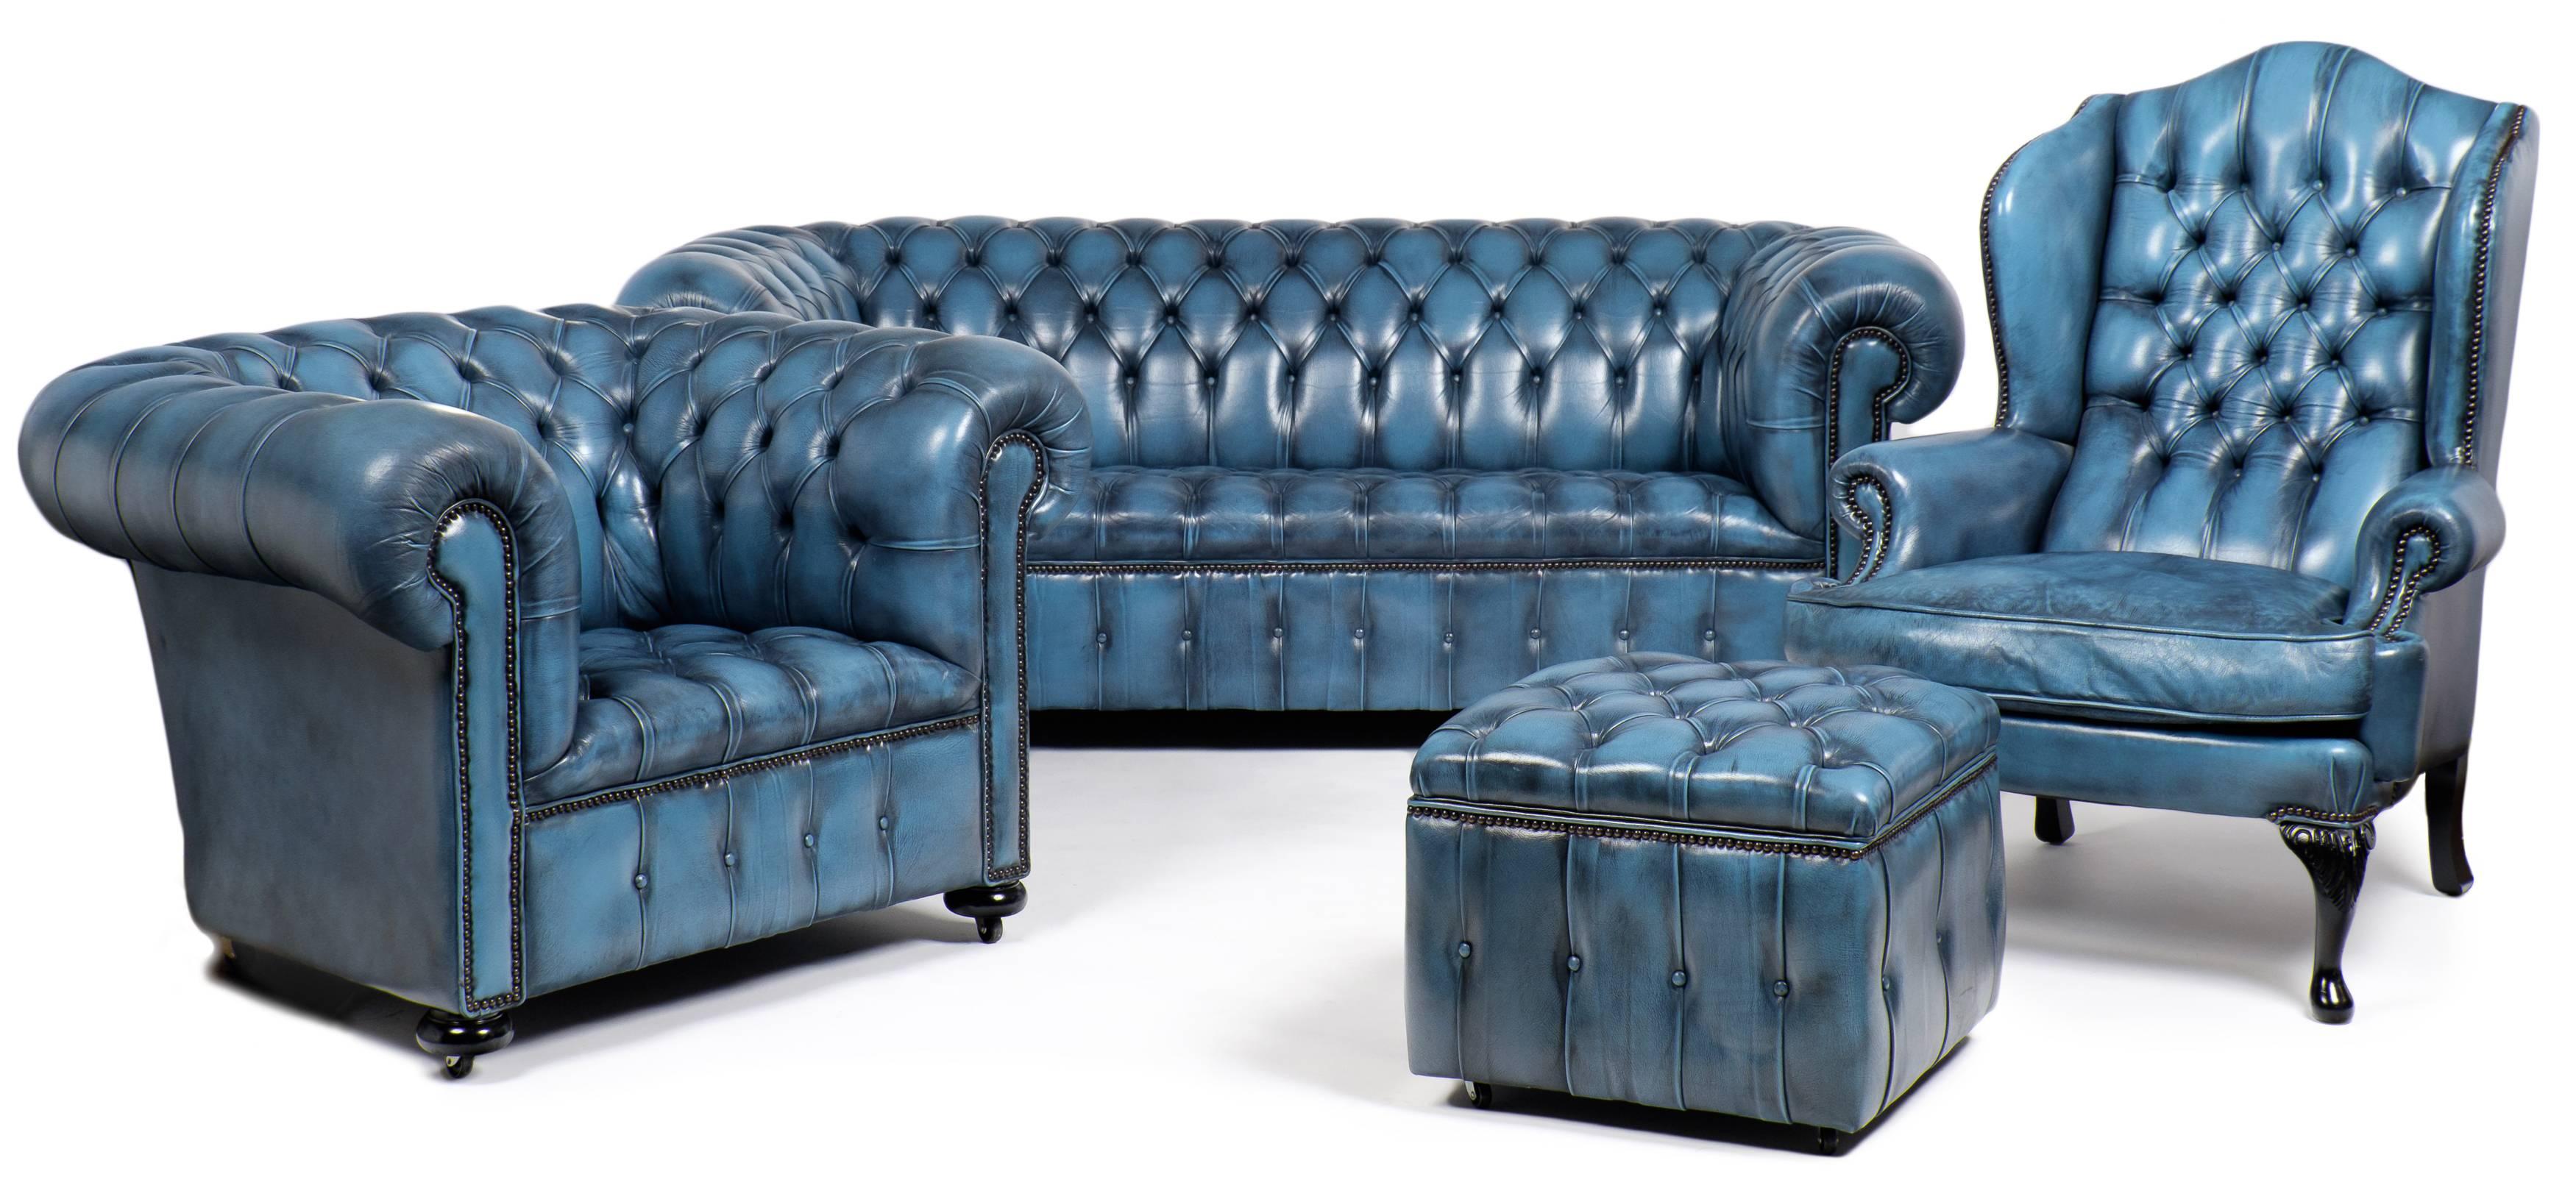 English vintage Chesterfield ottoman in steel blue tufted leather upholstery with bronze nailheads, on casters. Rich in character, the top of this stool hinges open for easy access to a large storage space.

See the matching Chesterfield sofa,